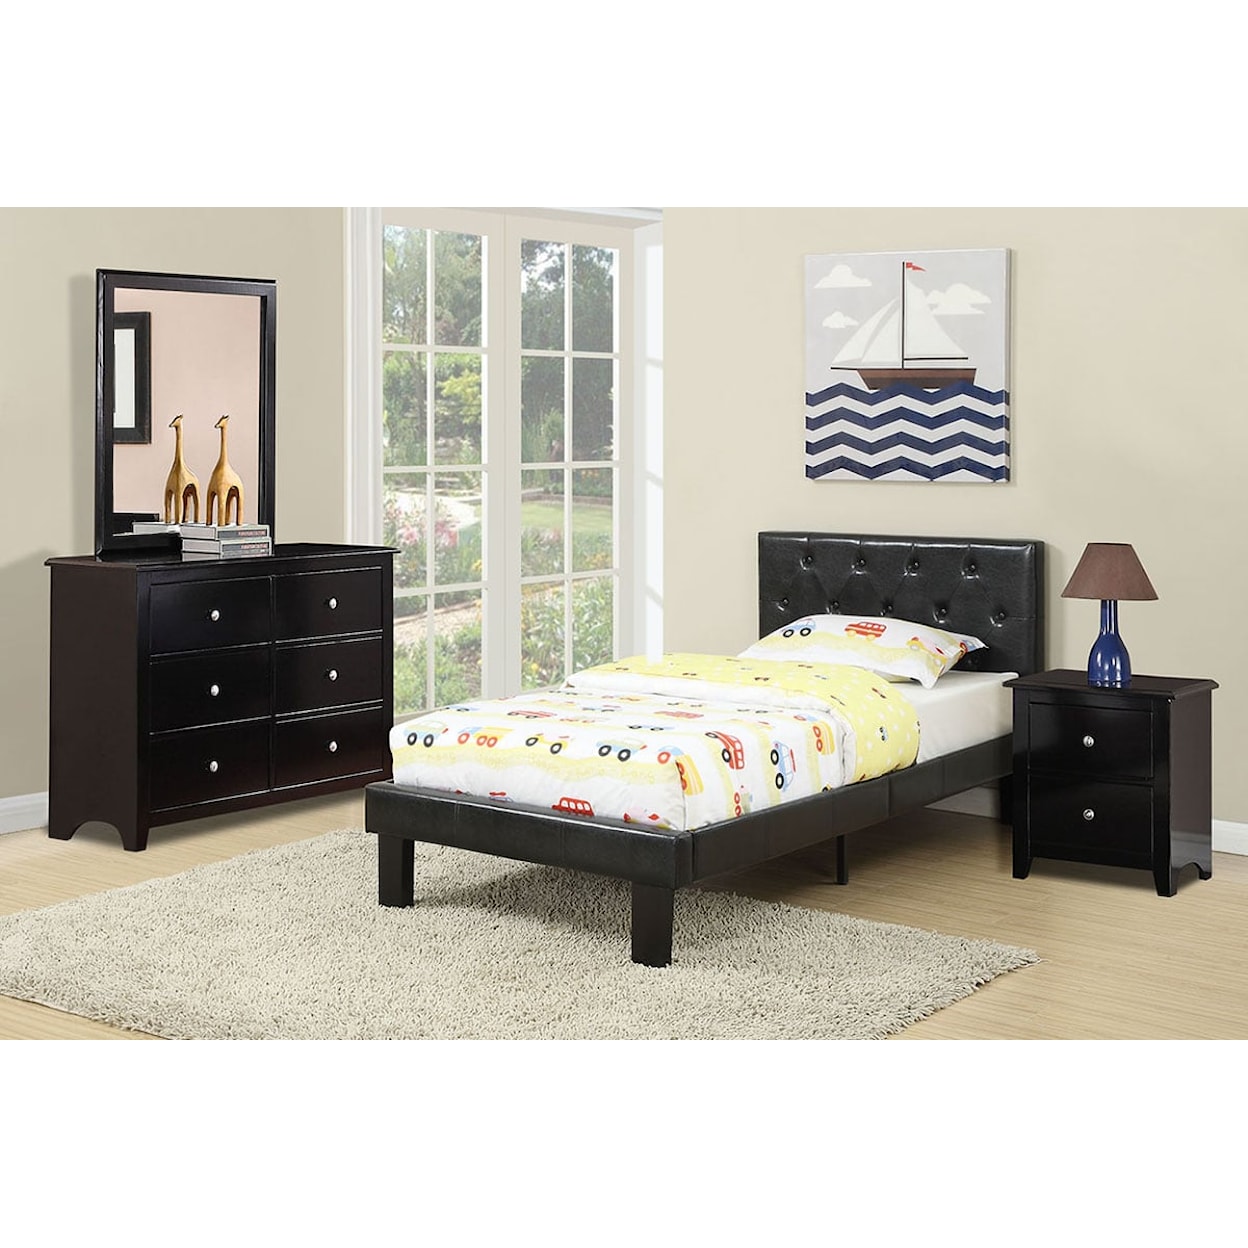 Poundex Twin/Full Beds DAILY BLACK FULL BED W/ SLATS |